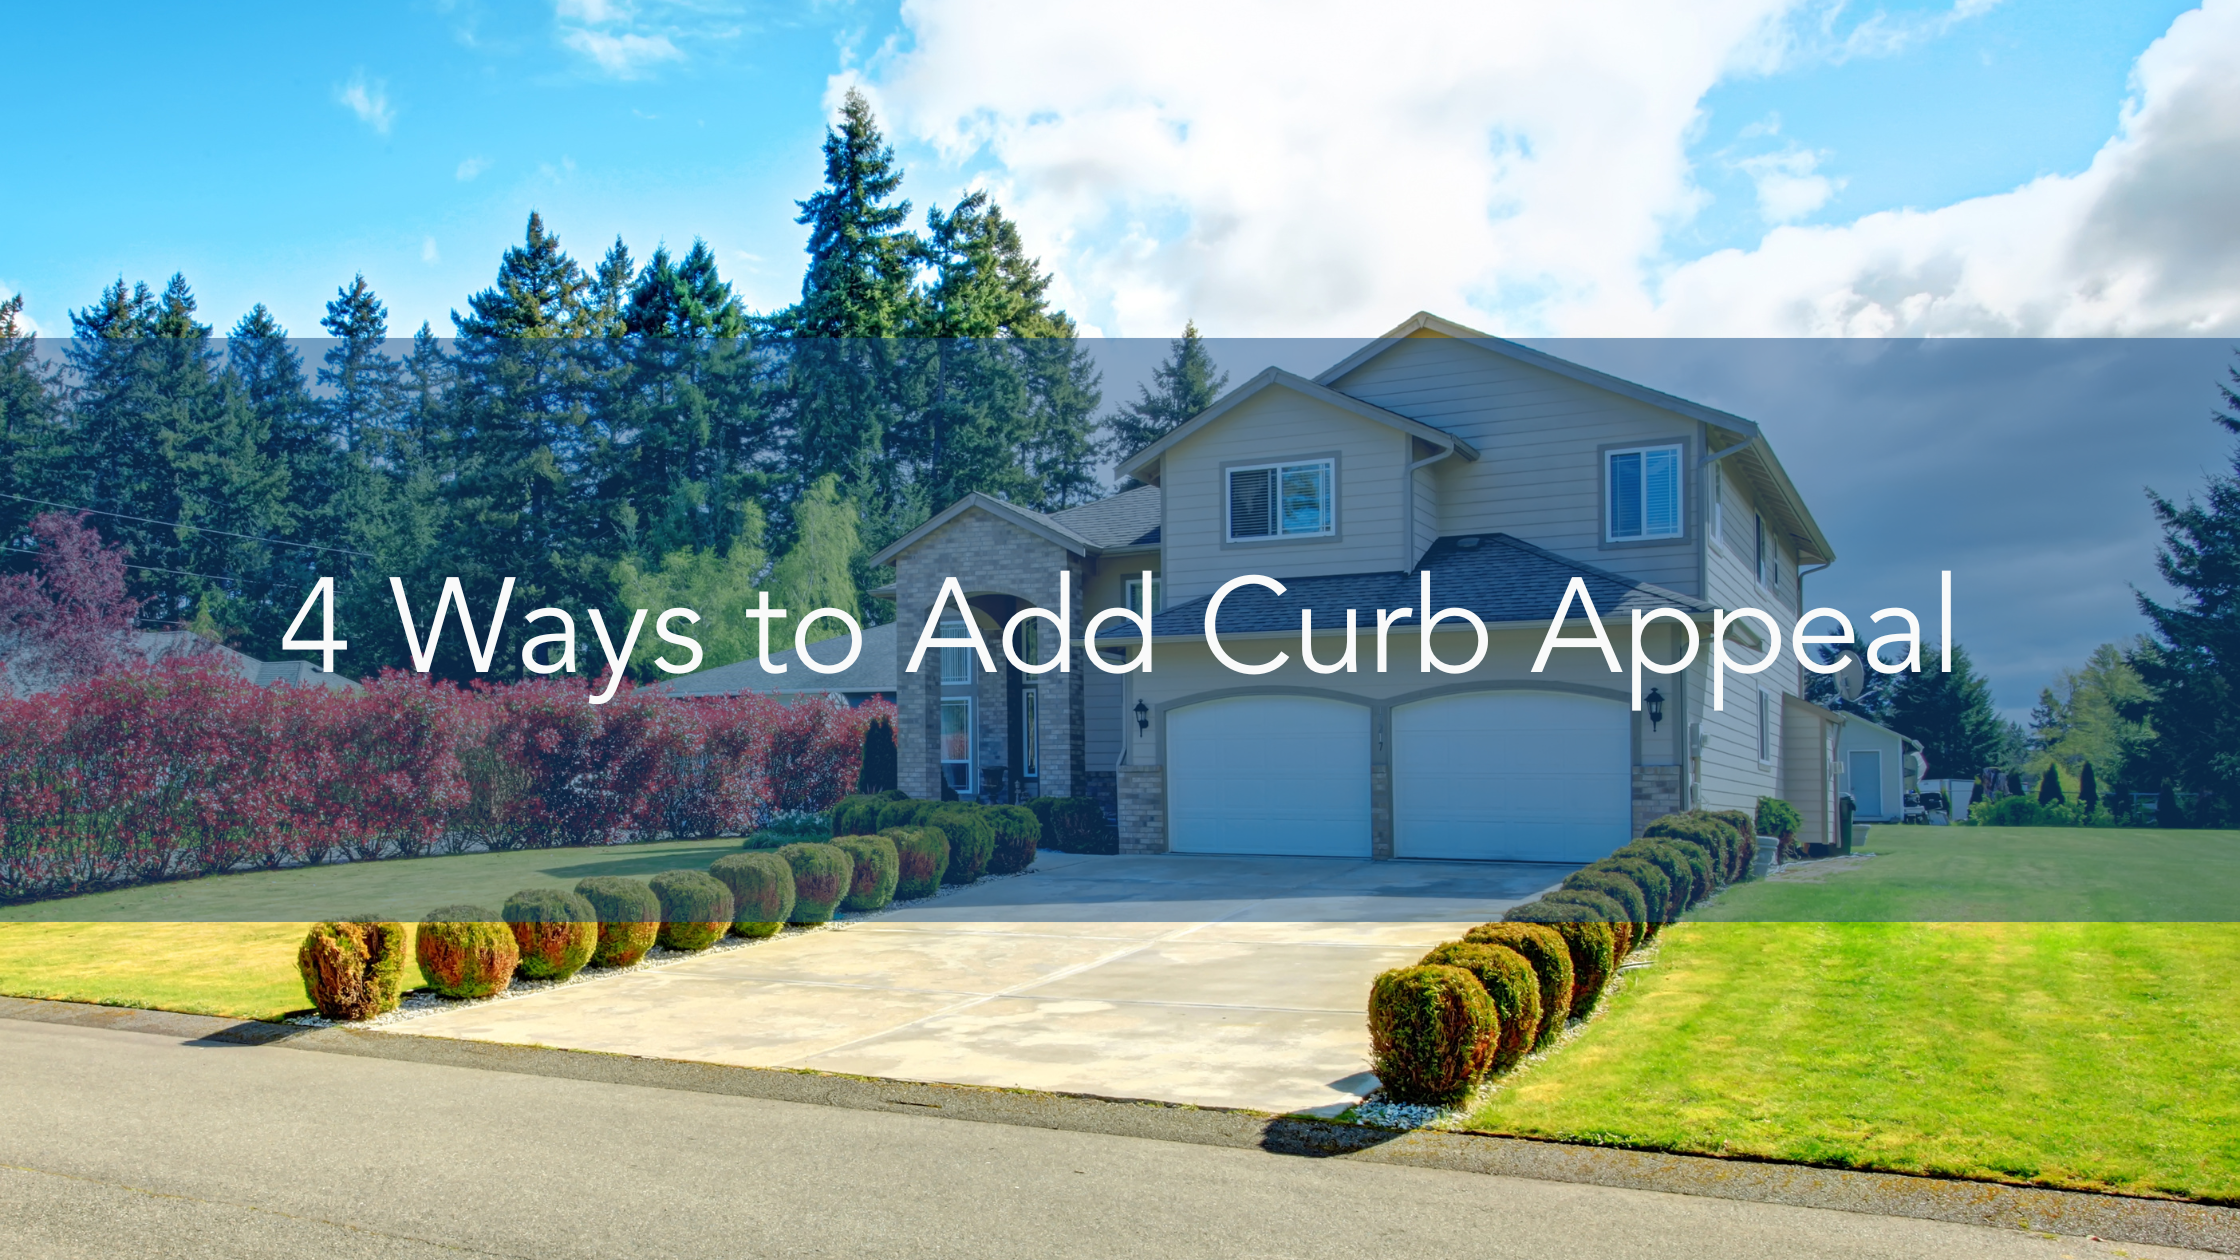 4 Ways to Add Curb Appeal